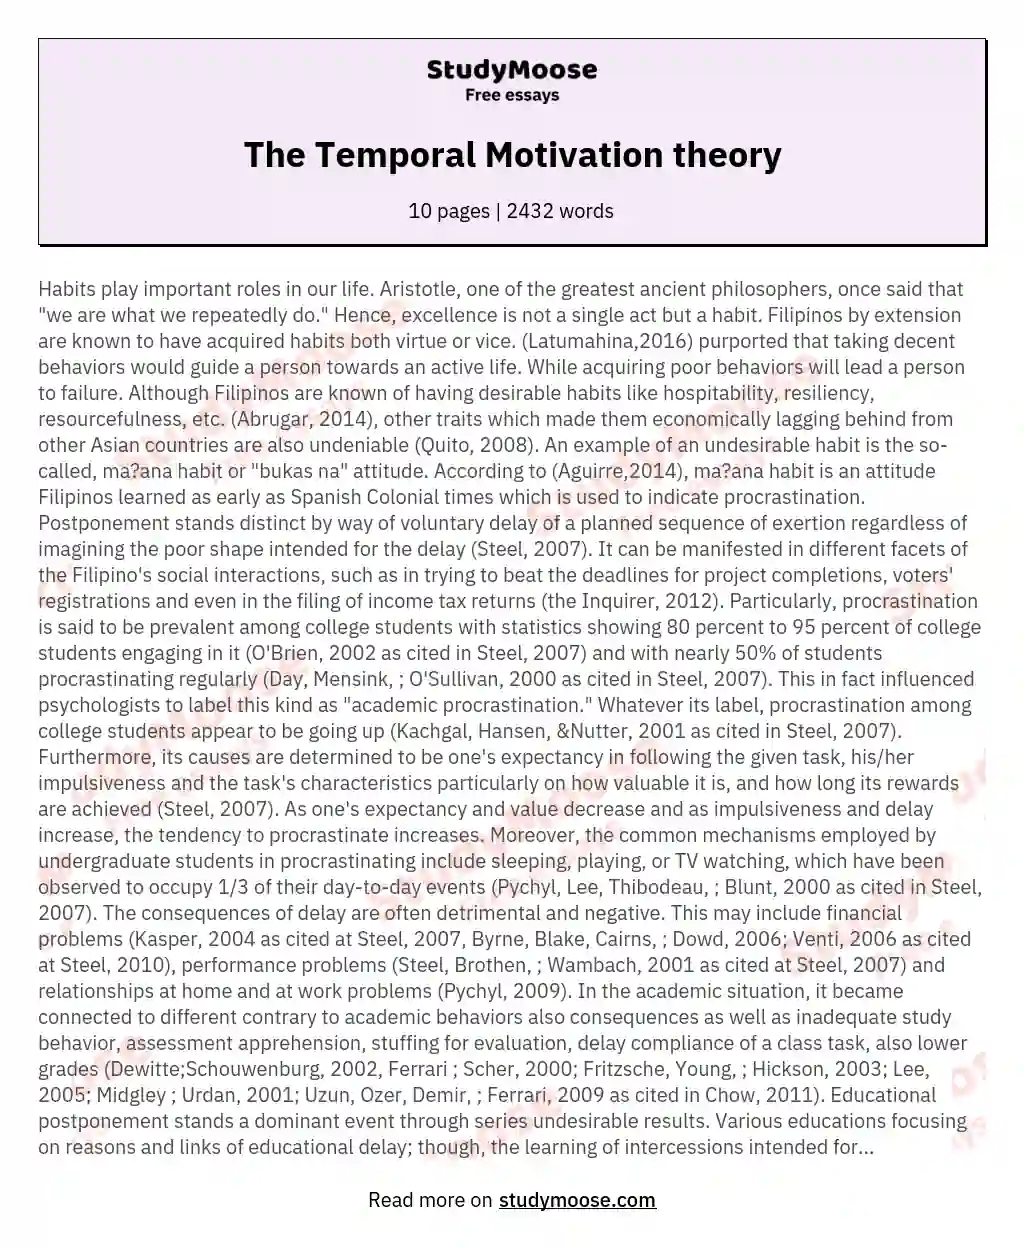 The Temporal Motivation theory